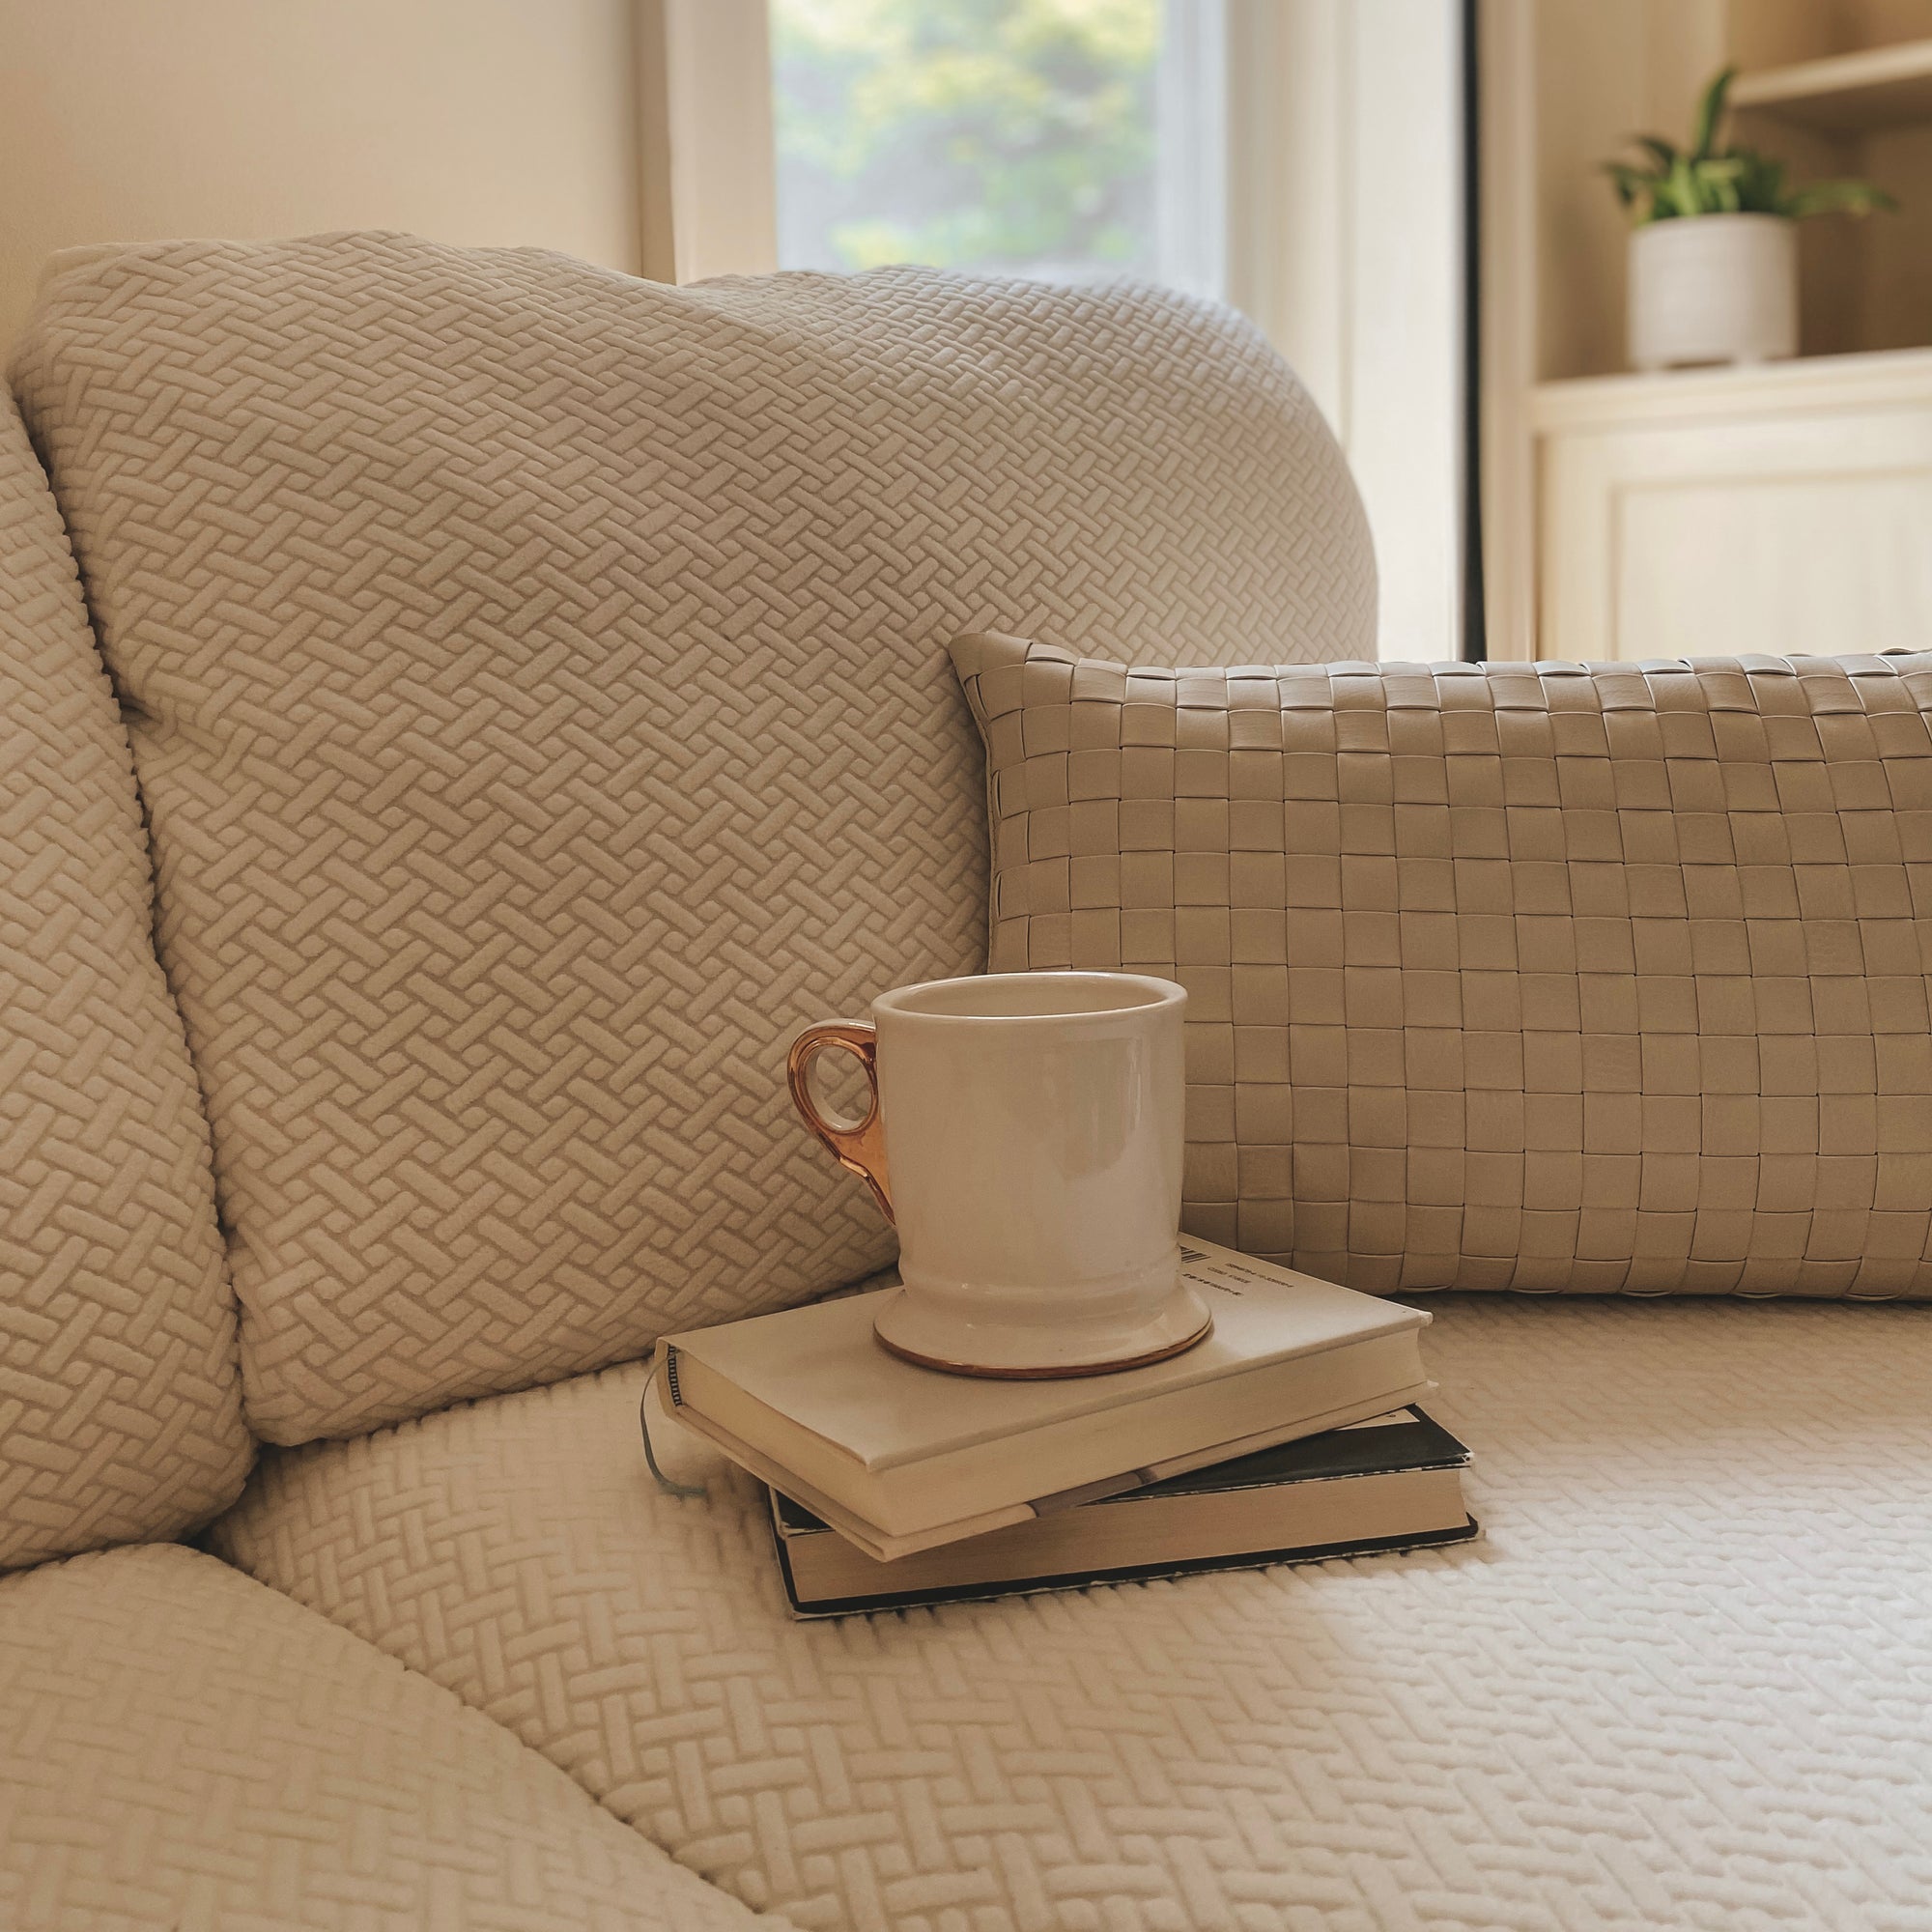 5 Reasons a Slipcover is a Must-Have for Your Sofa